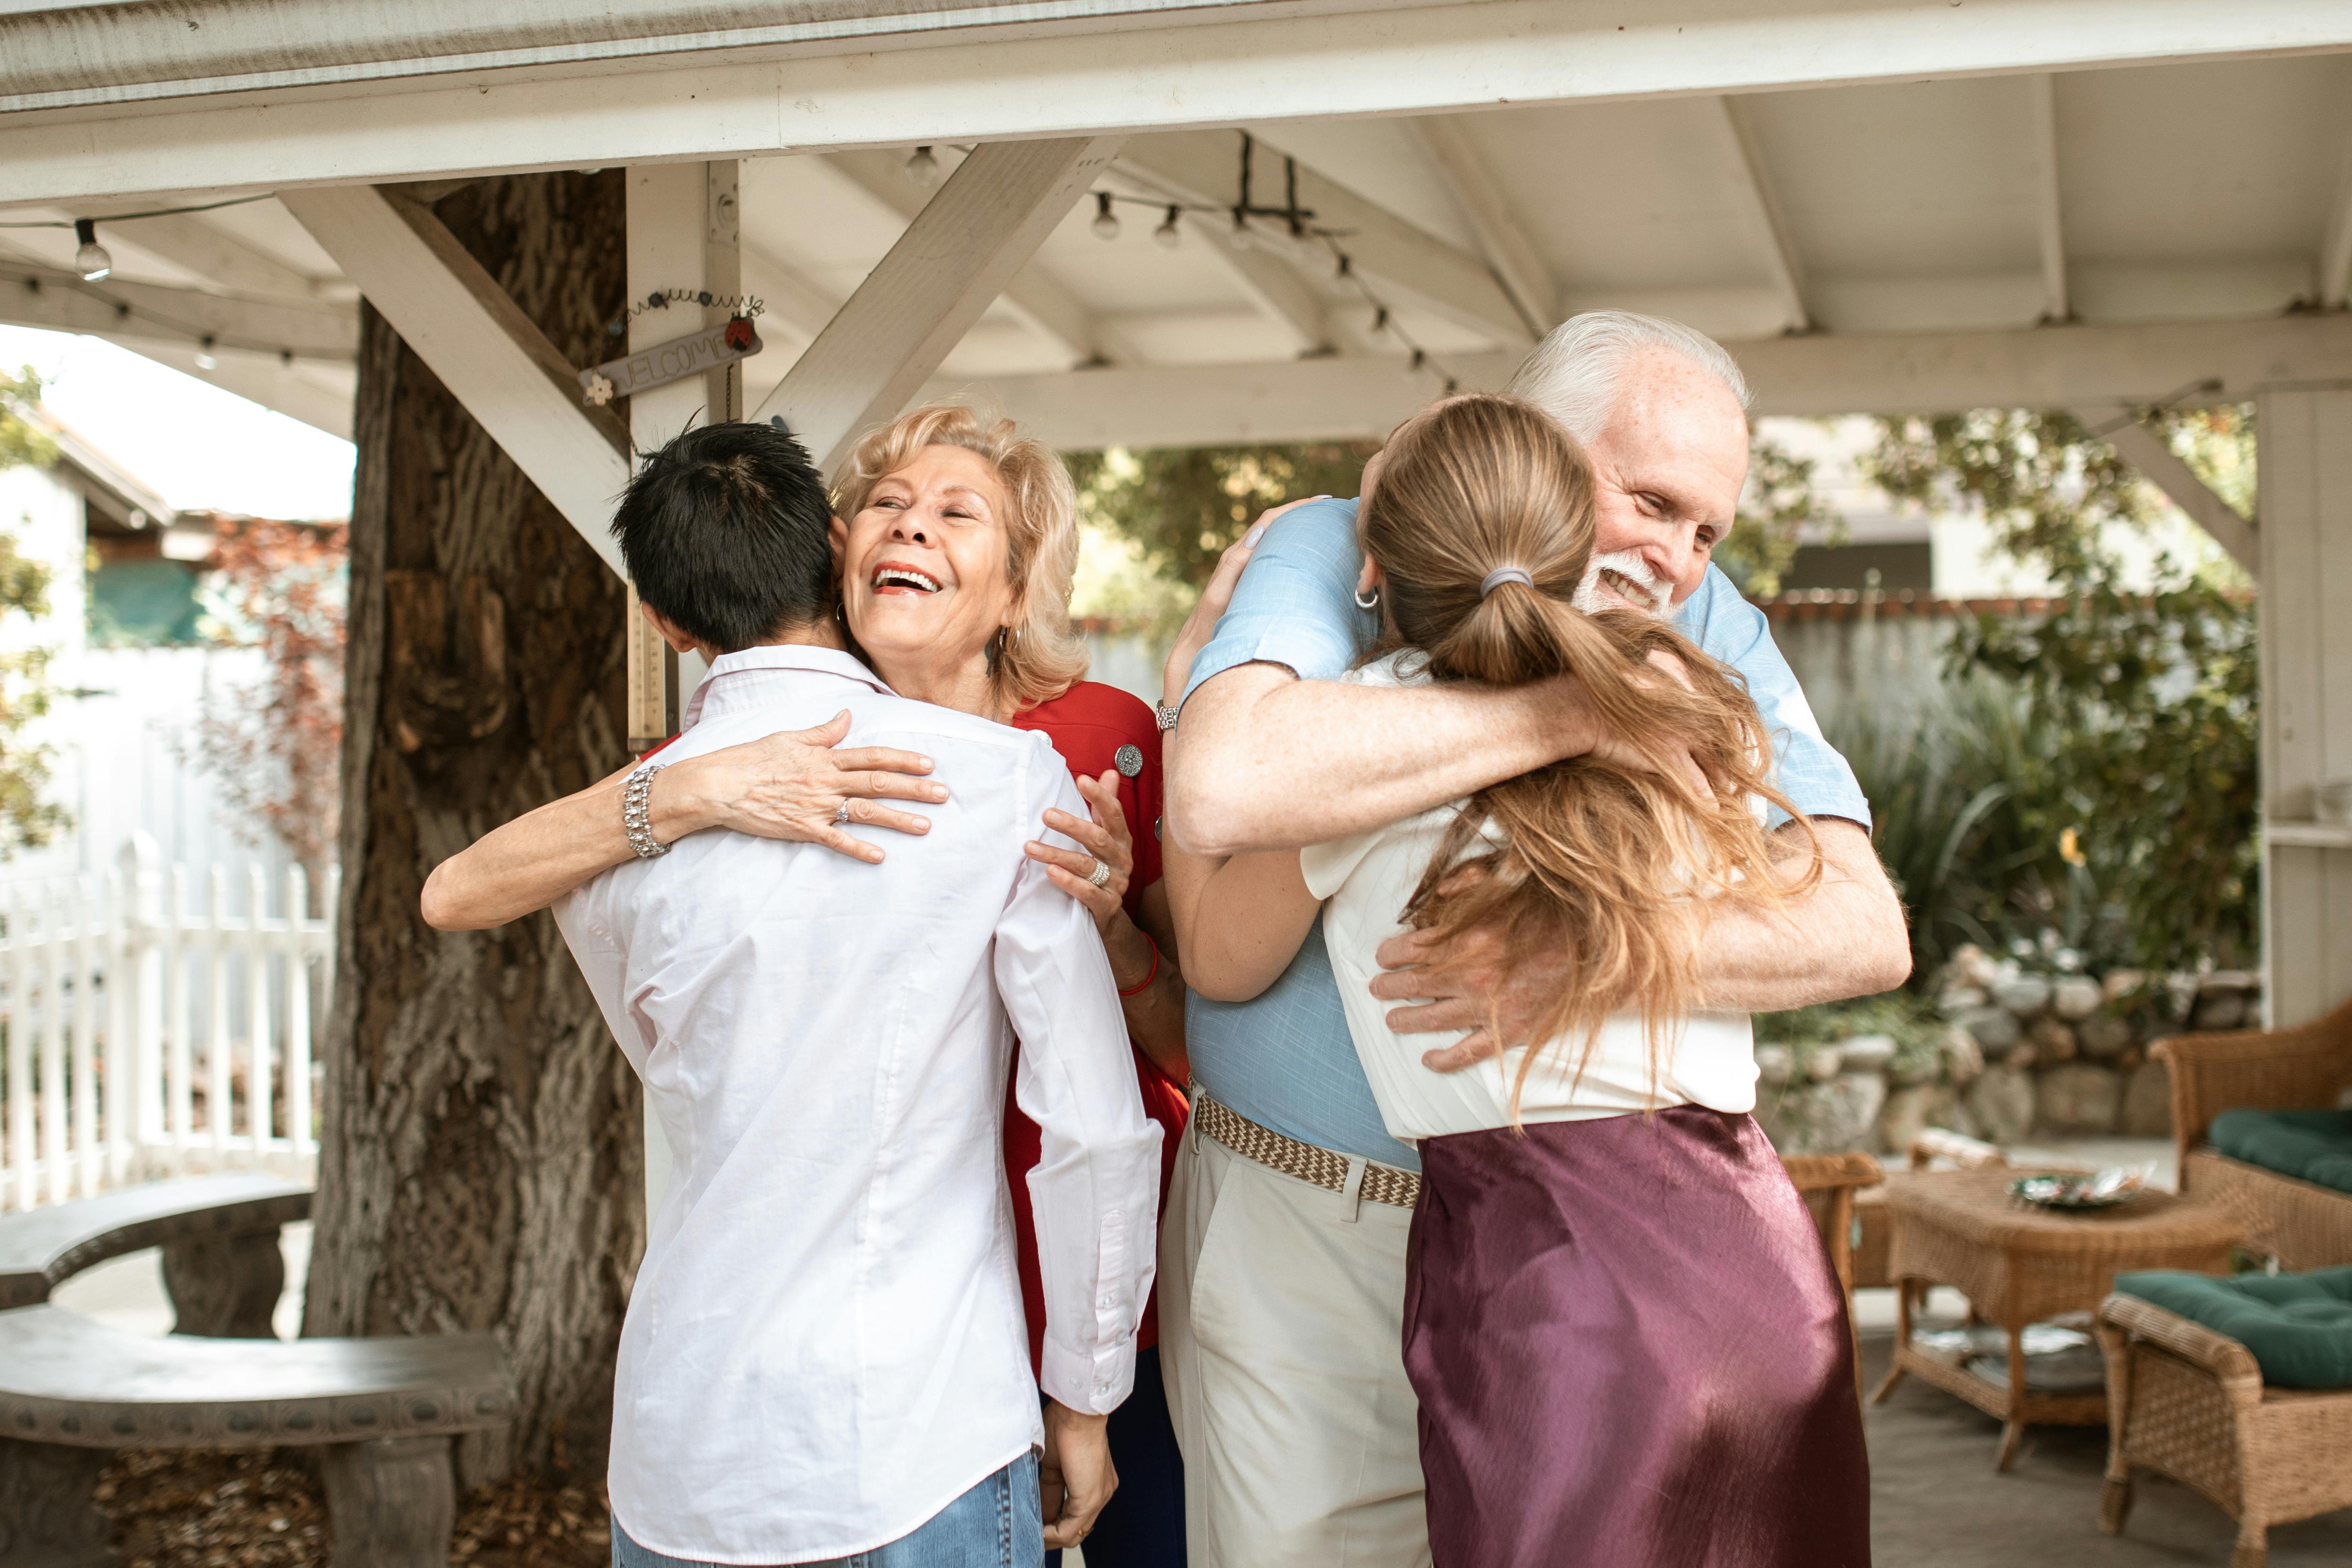 Two happy couples sharing hugs | Source: Pexels